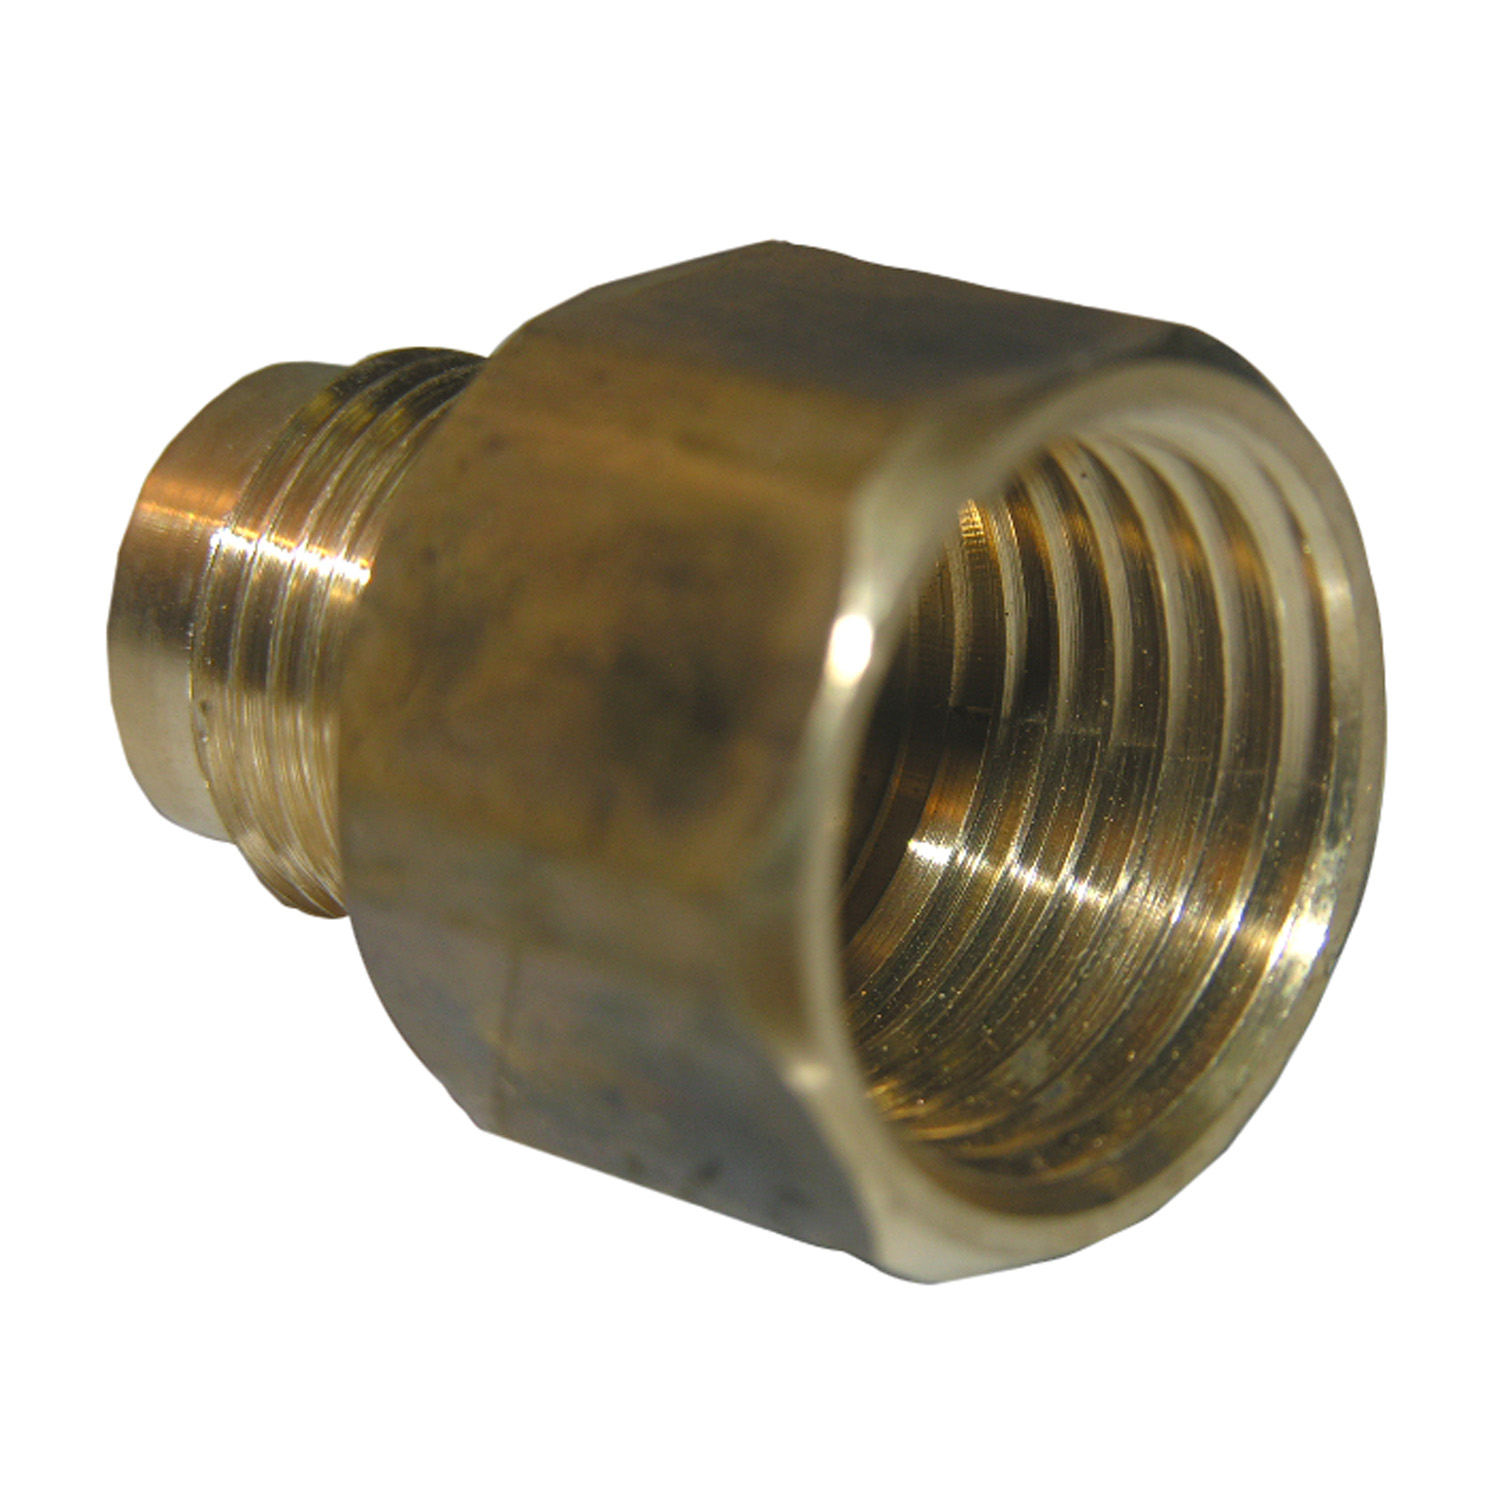 17-4633 Pipe Adapter, 3/8 x 1/2 in, Male Flare x FPT, Brass, 900 psi Pressure